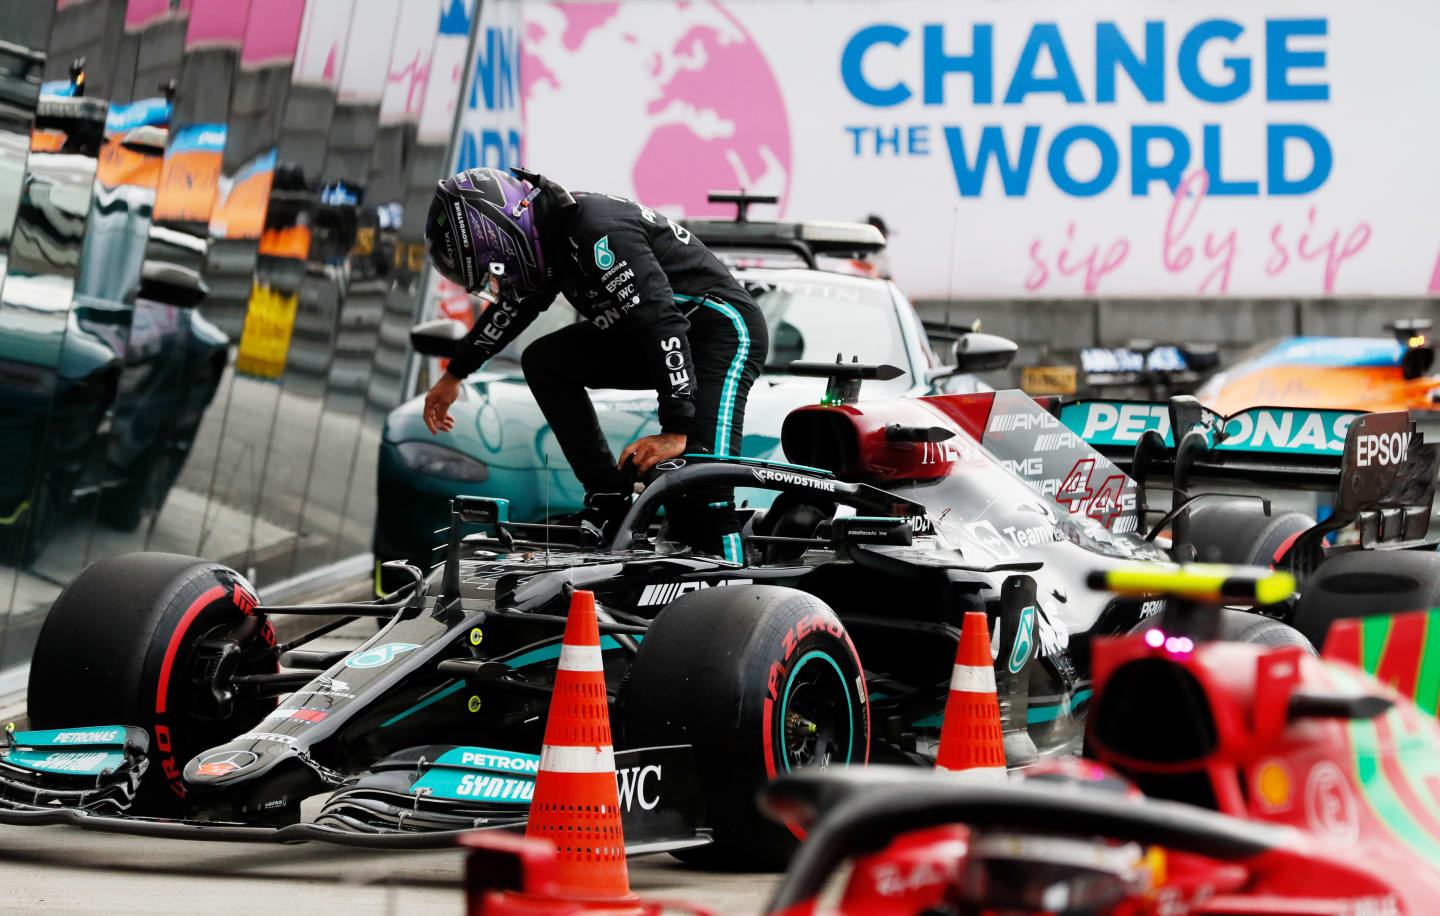 SOCHI, RUSSIA - SEPTEMBER 25: Lewis Hamilton of Great Britain and Mercedes GP climbs from his car